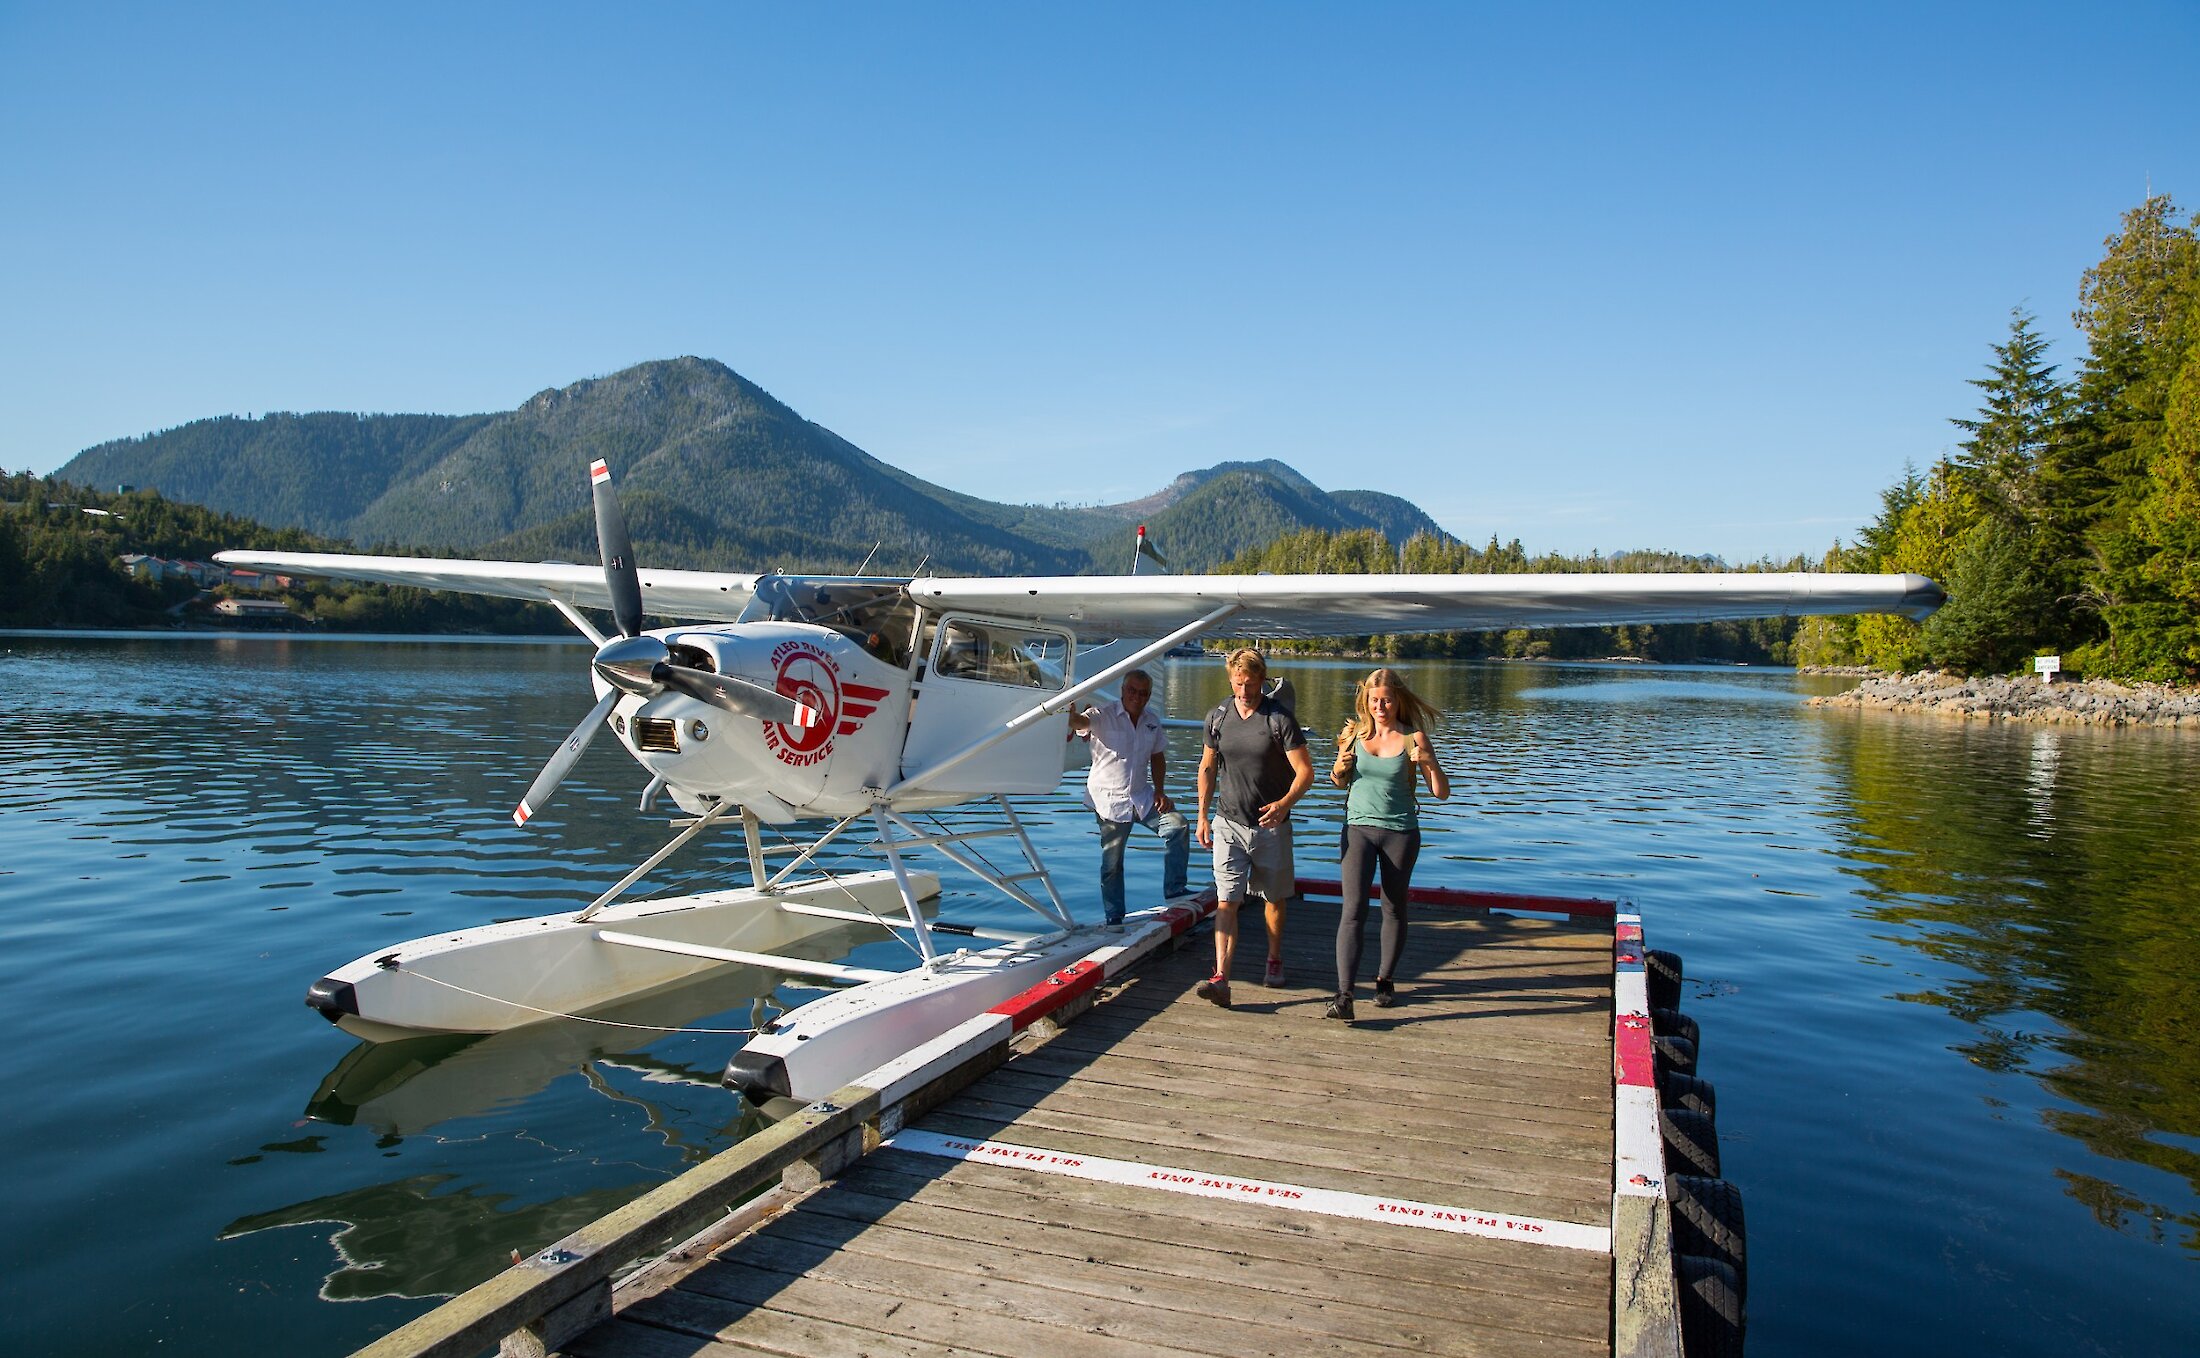 Walking the dock next to a float plane at Hot Springs Cove.